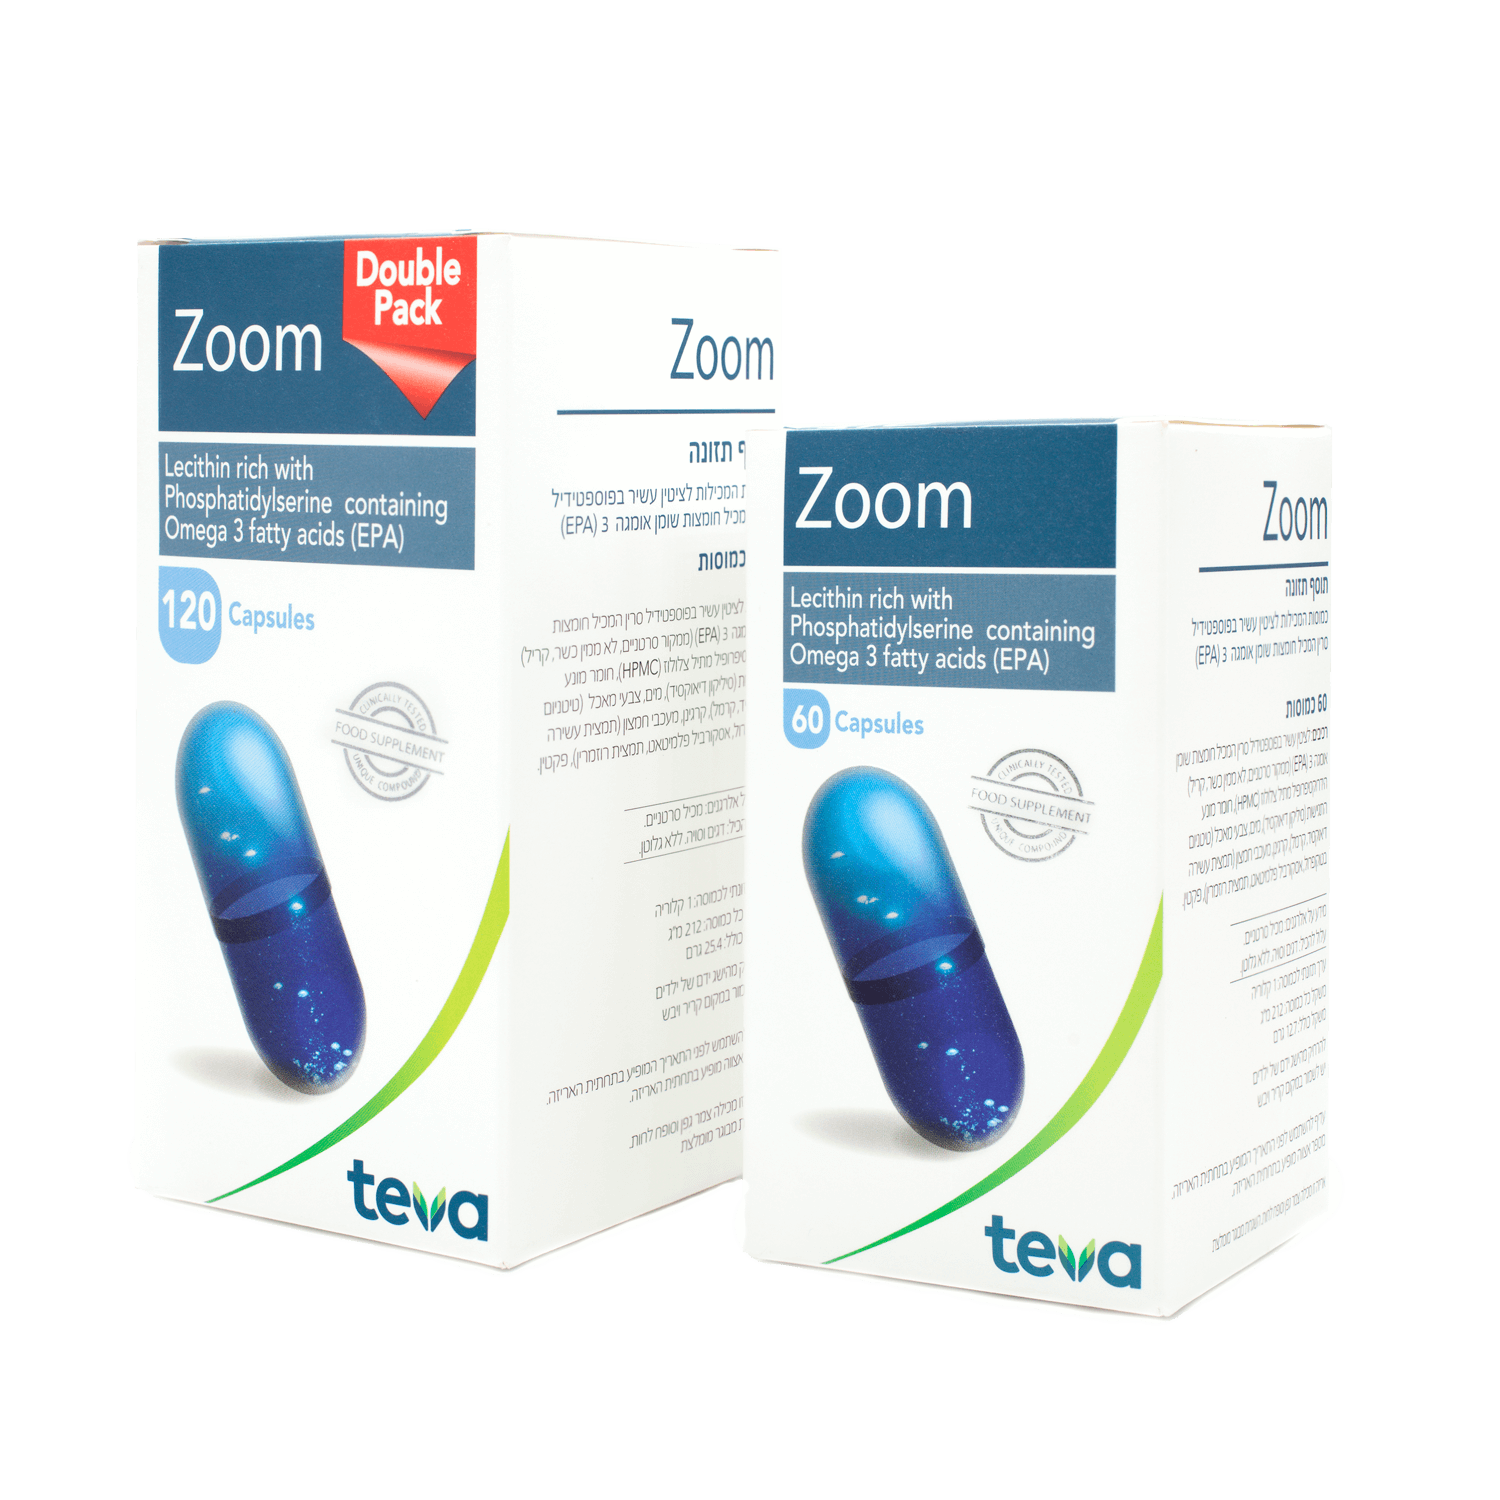 Zoom is often used in combination with conventional and other alternative ADHD therapies